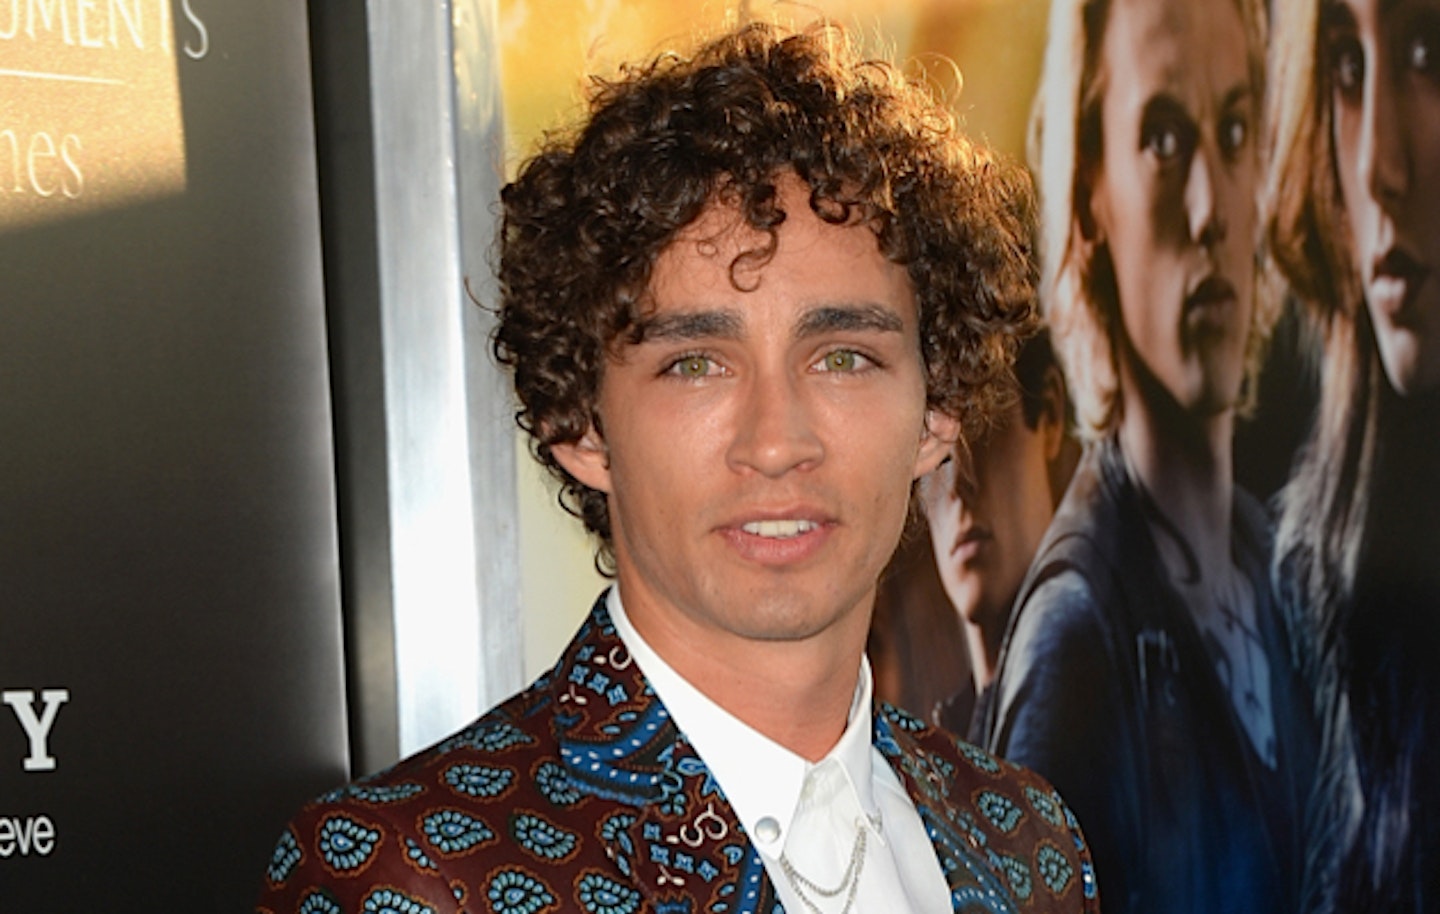 Robert-Sheehan-Statistical-probability-love-at-first-sight